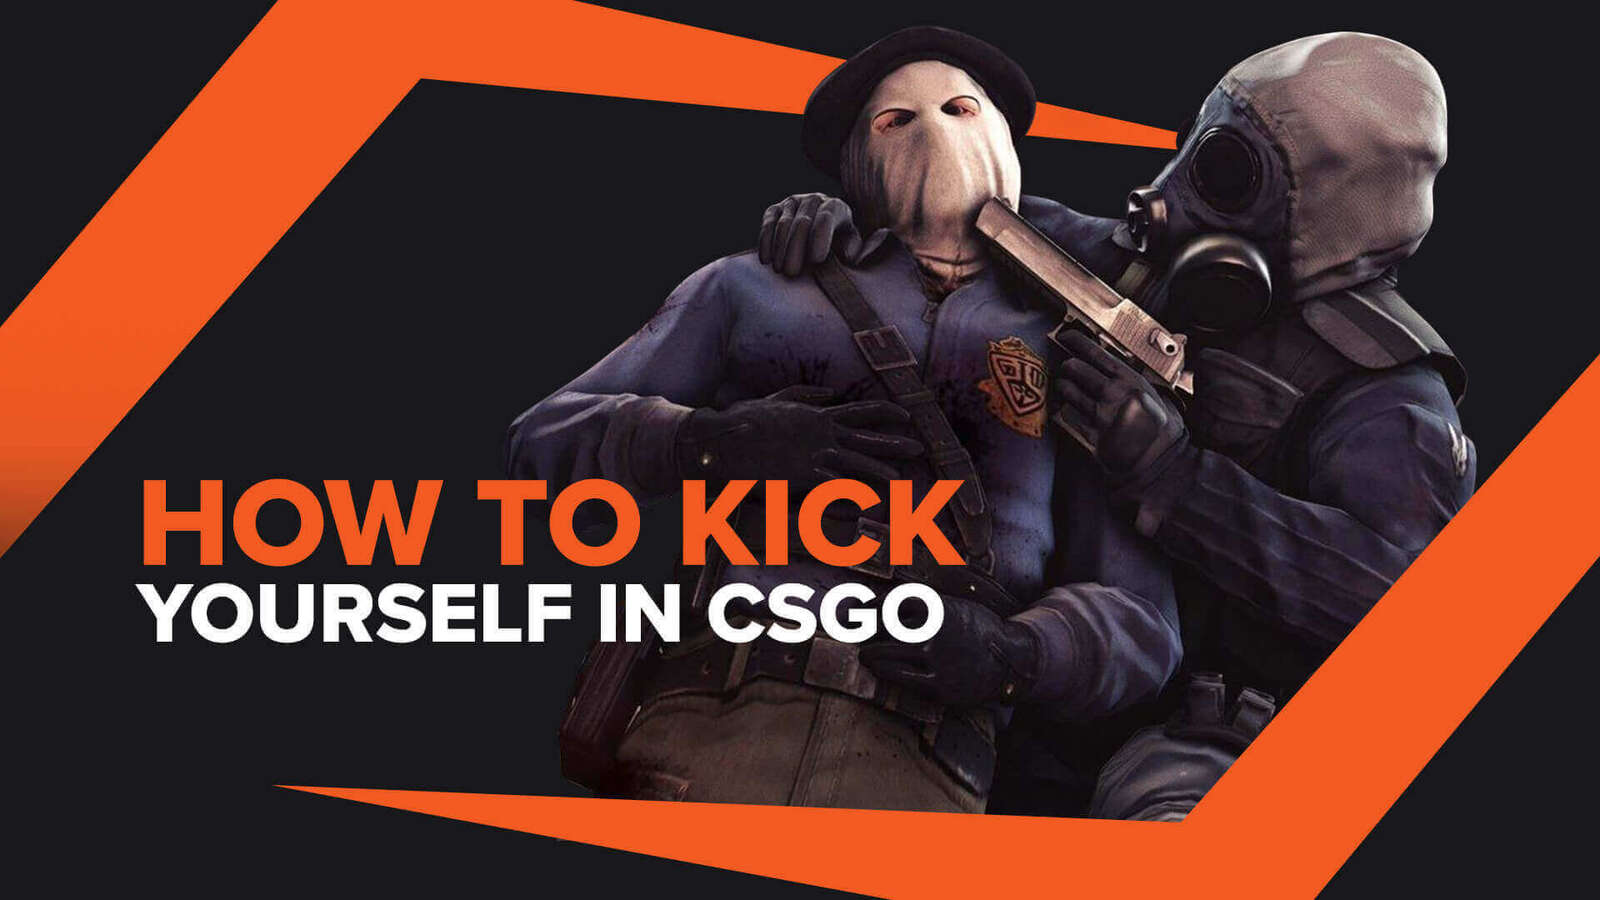 How to kick yourself in CS:GO